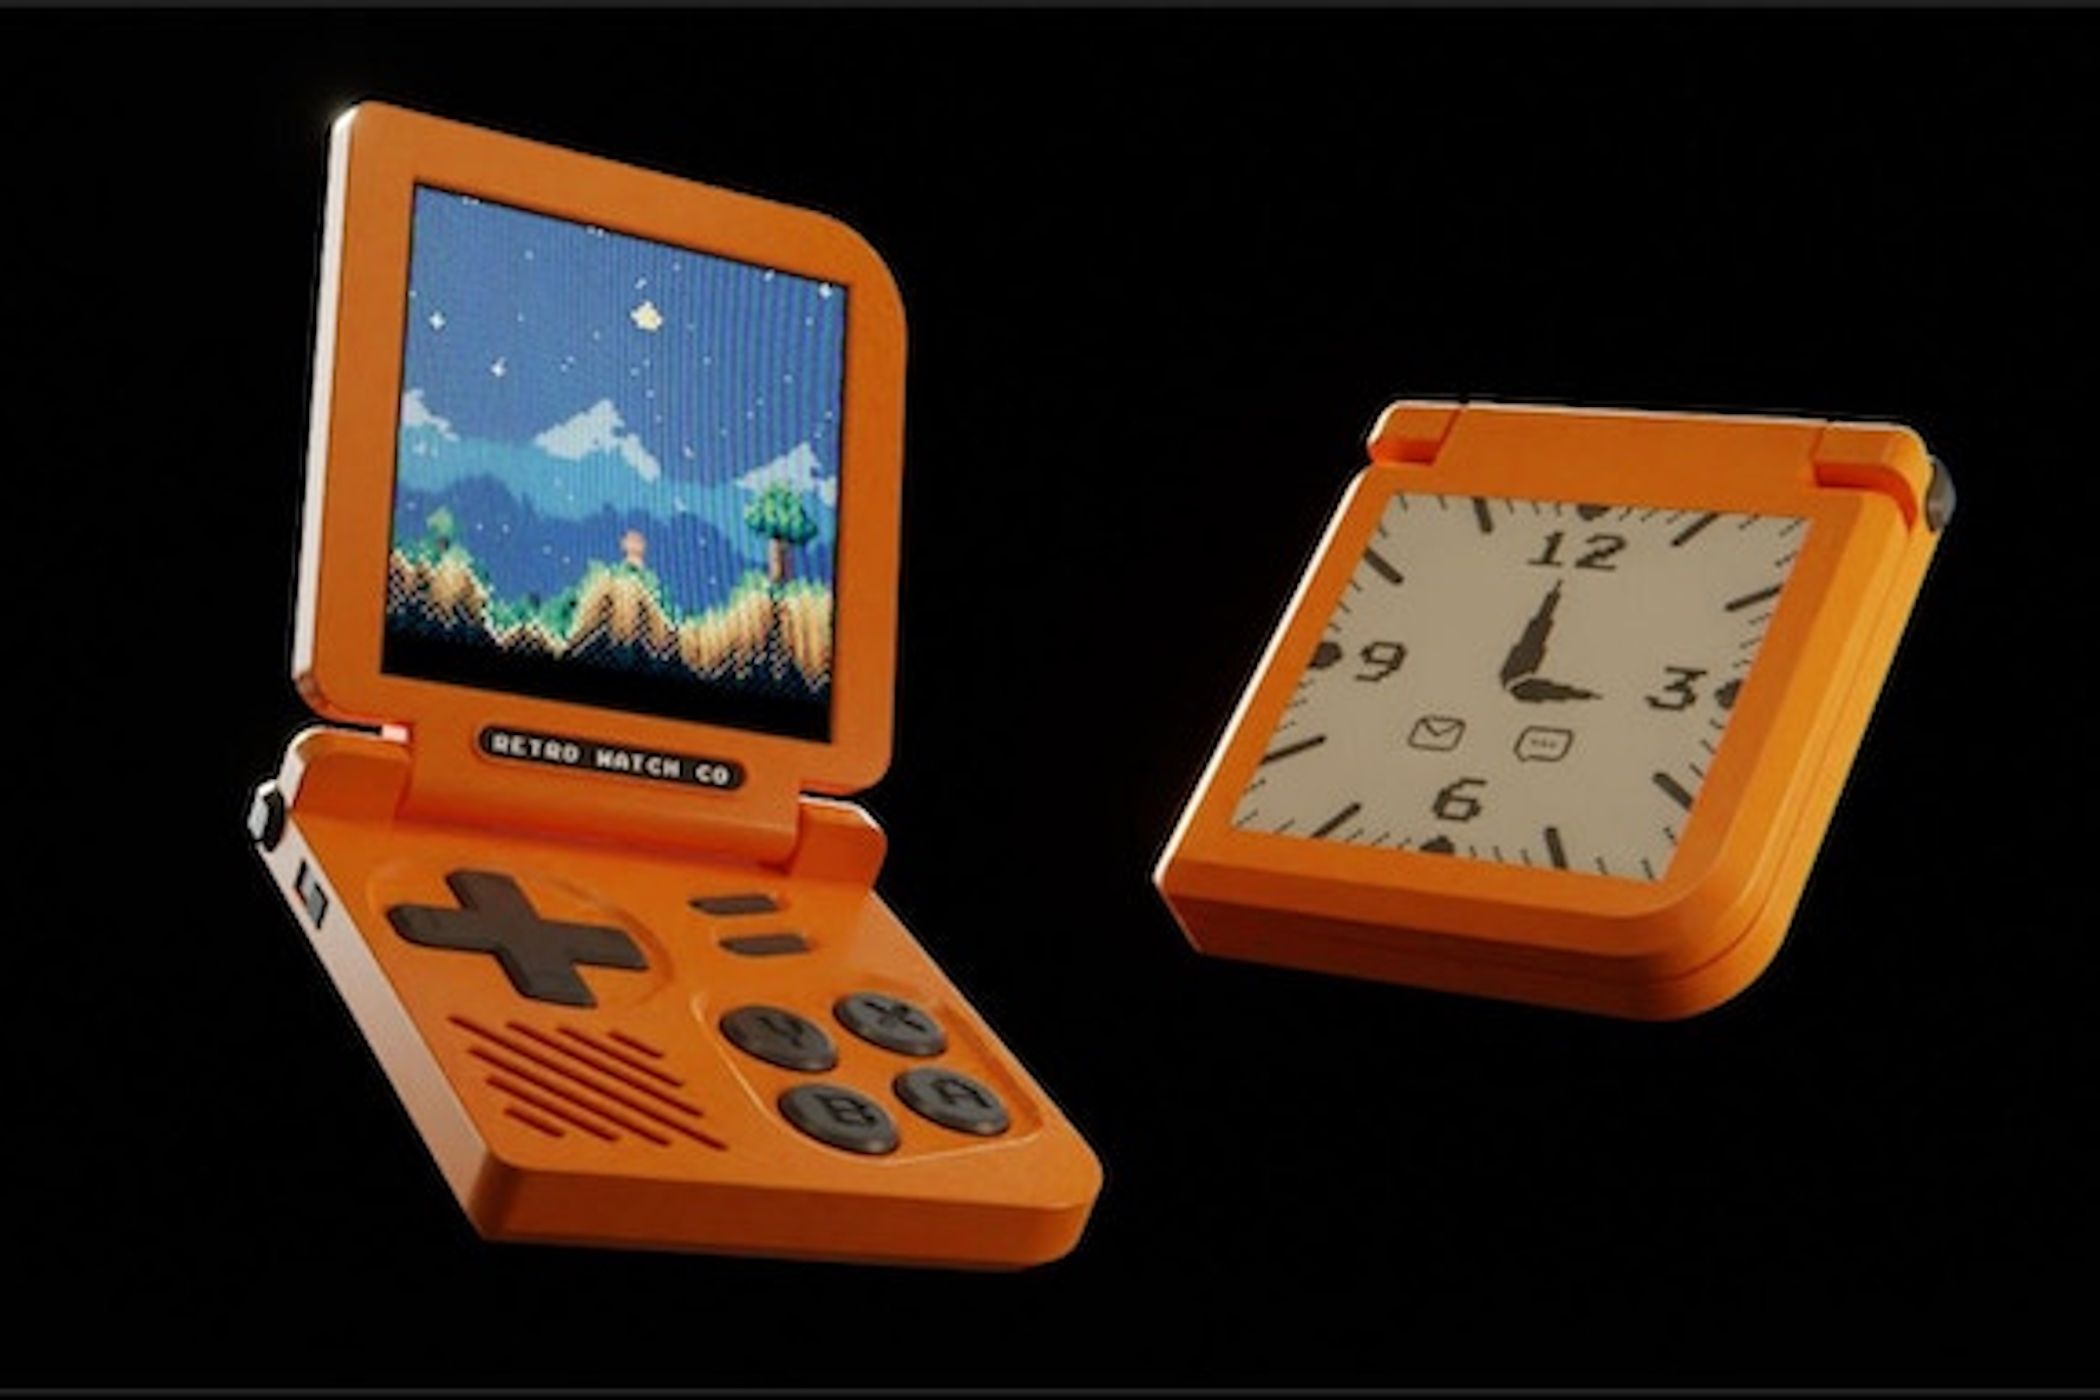 This awesome watch lets you play your favorite classic games on your wrist